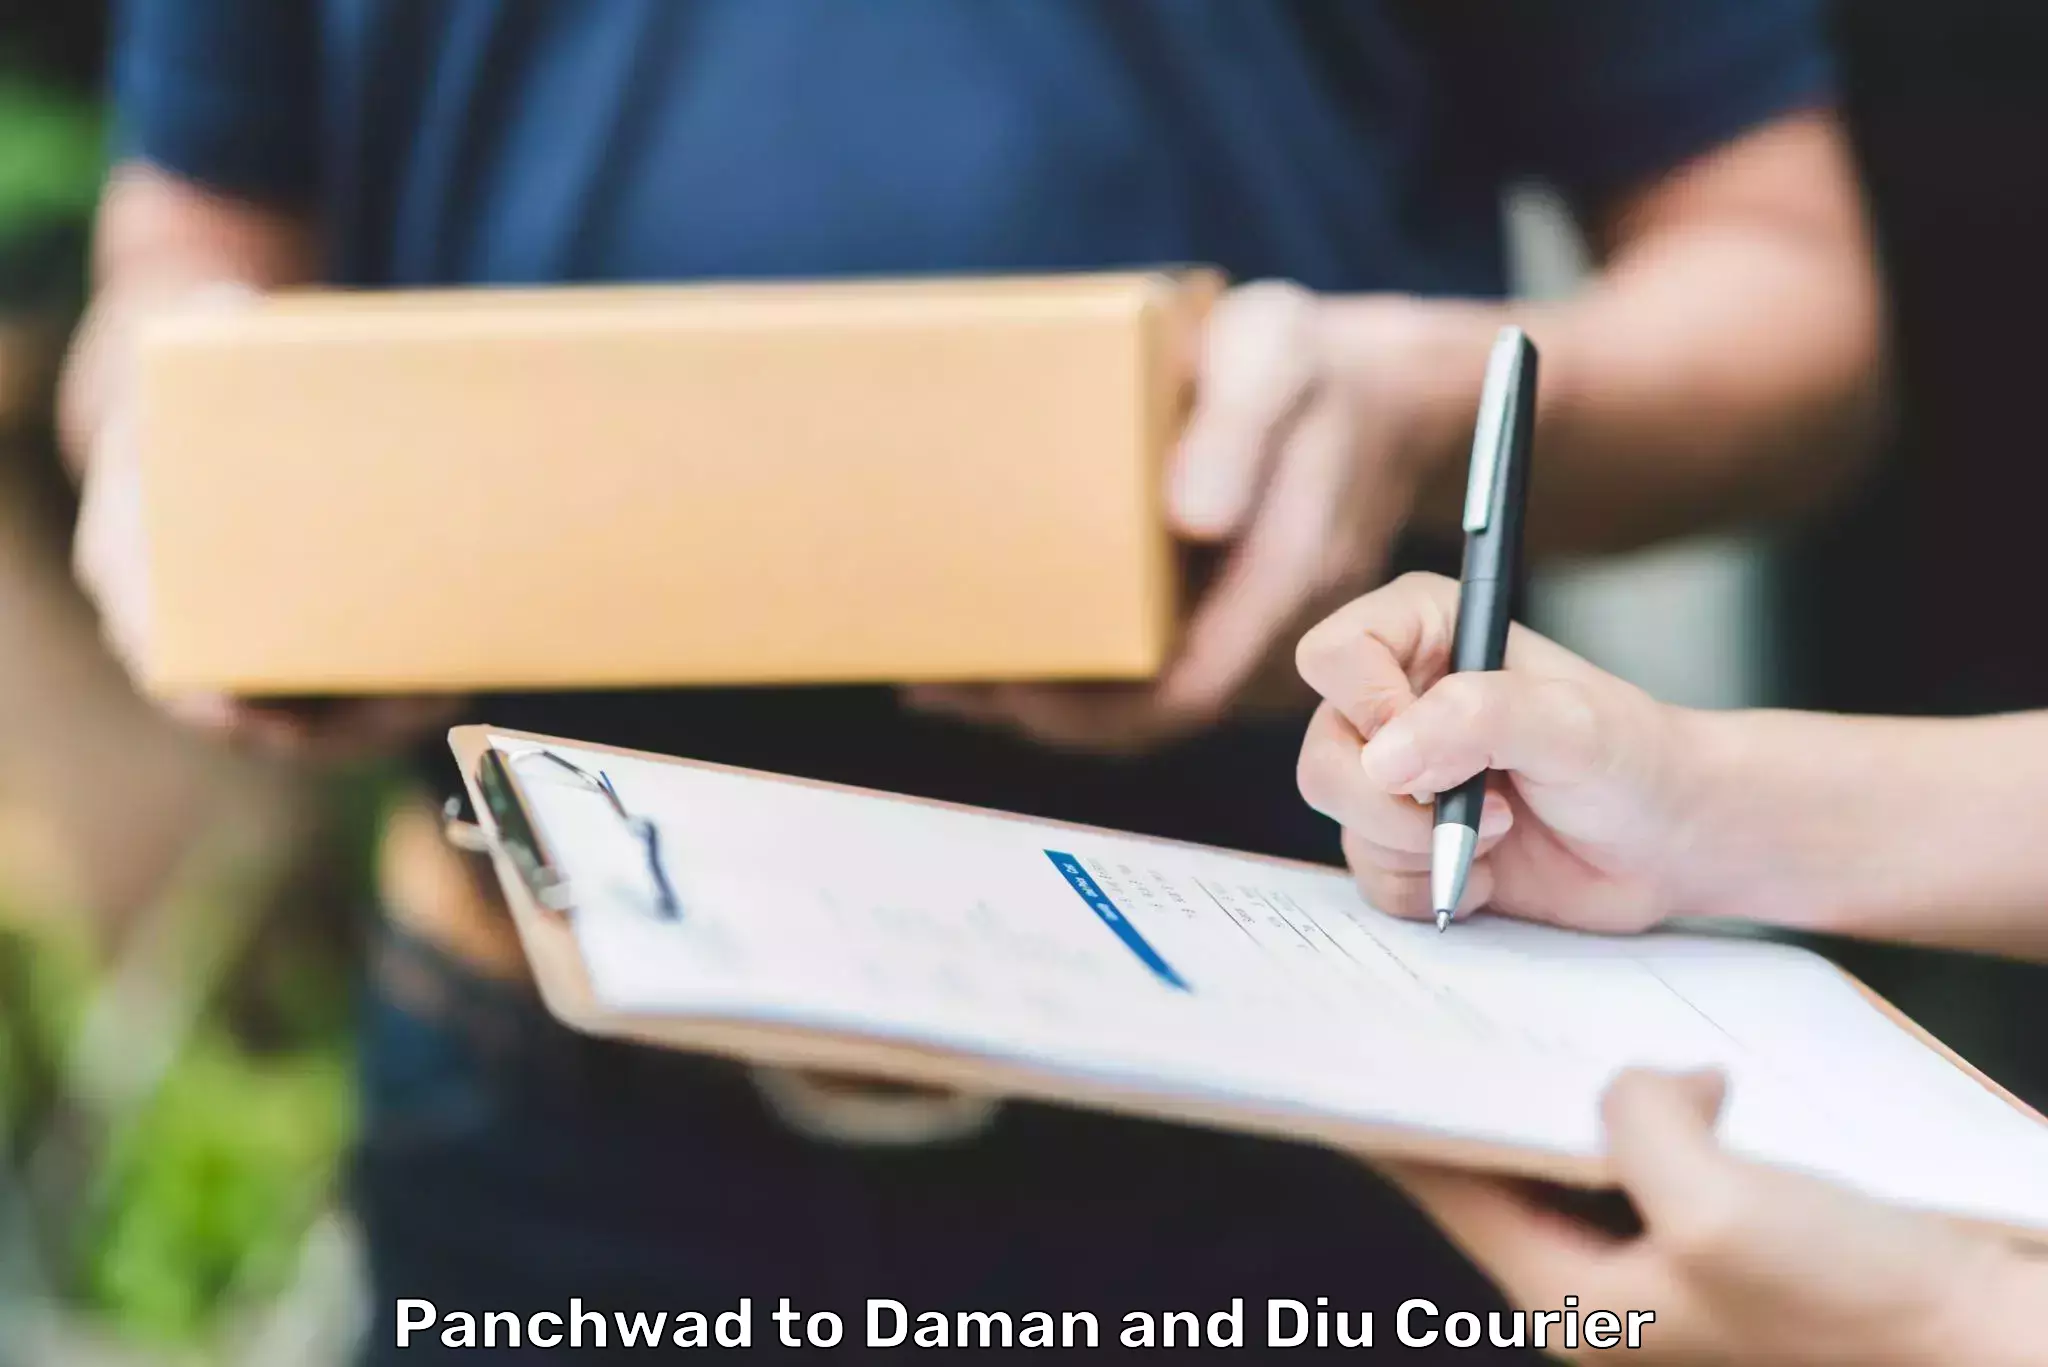 Global shipping networks Panchwad to Daman and Diu